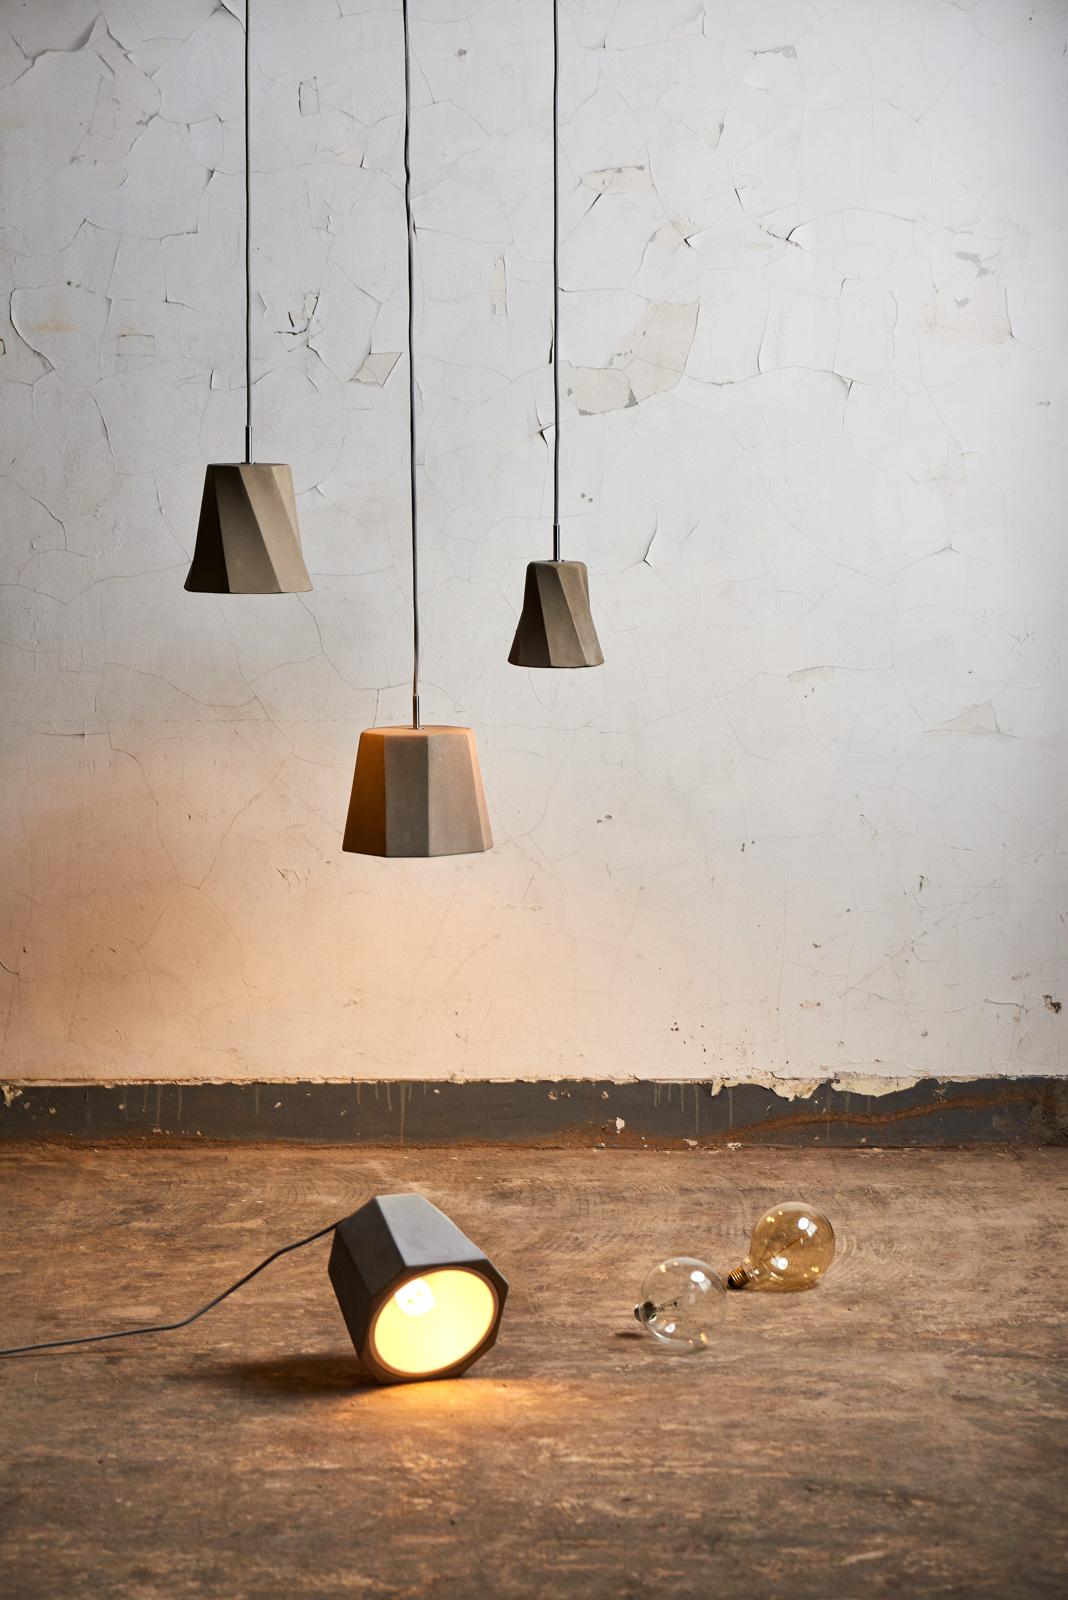 The Castle ROCK Pendant ’s faceted concrete shade is a geometric representation of what is found in nature. The matt concrete exterior is contrasted by a metallic interior which reflects and amplifies the down-cast light providing a soft